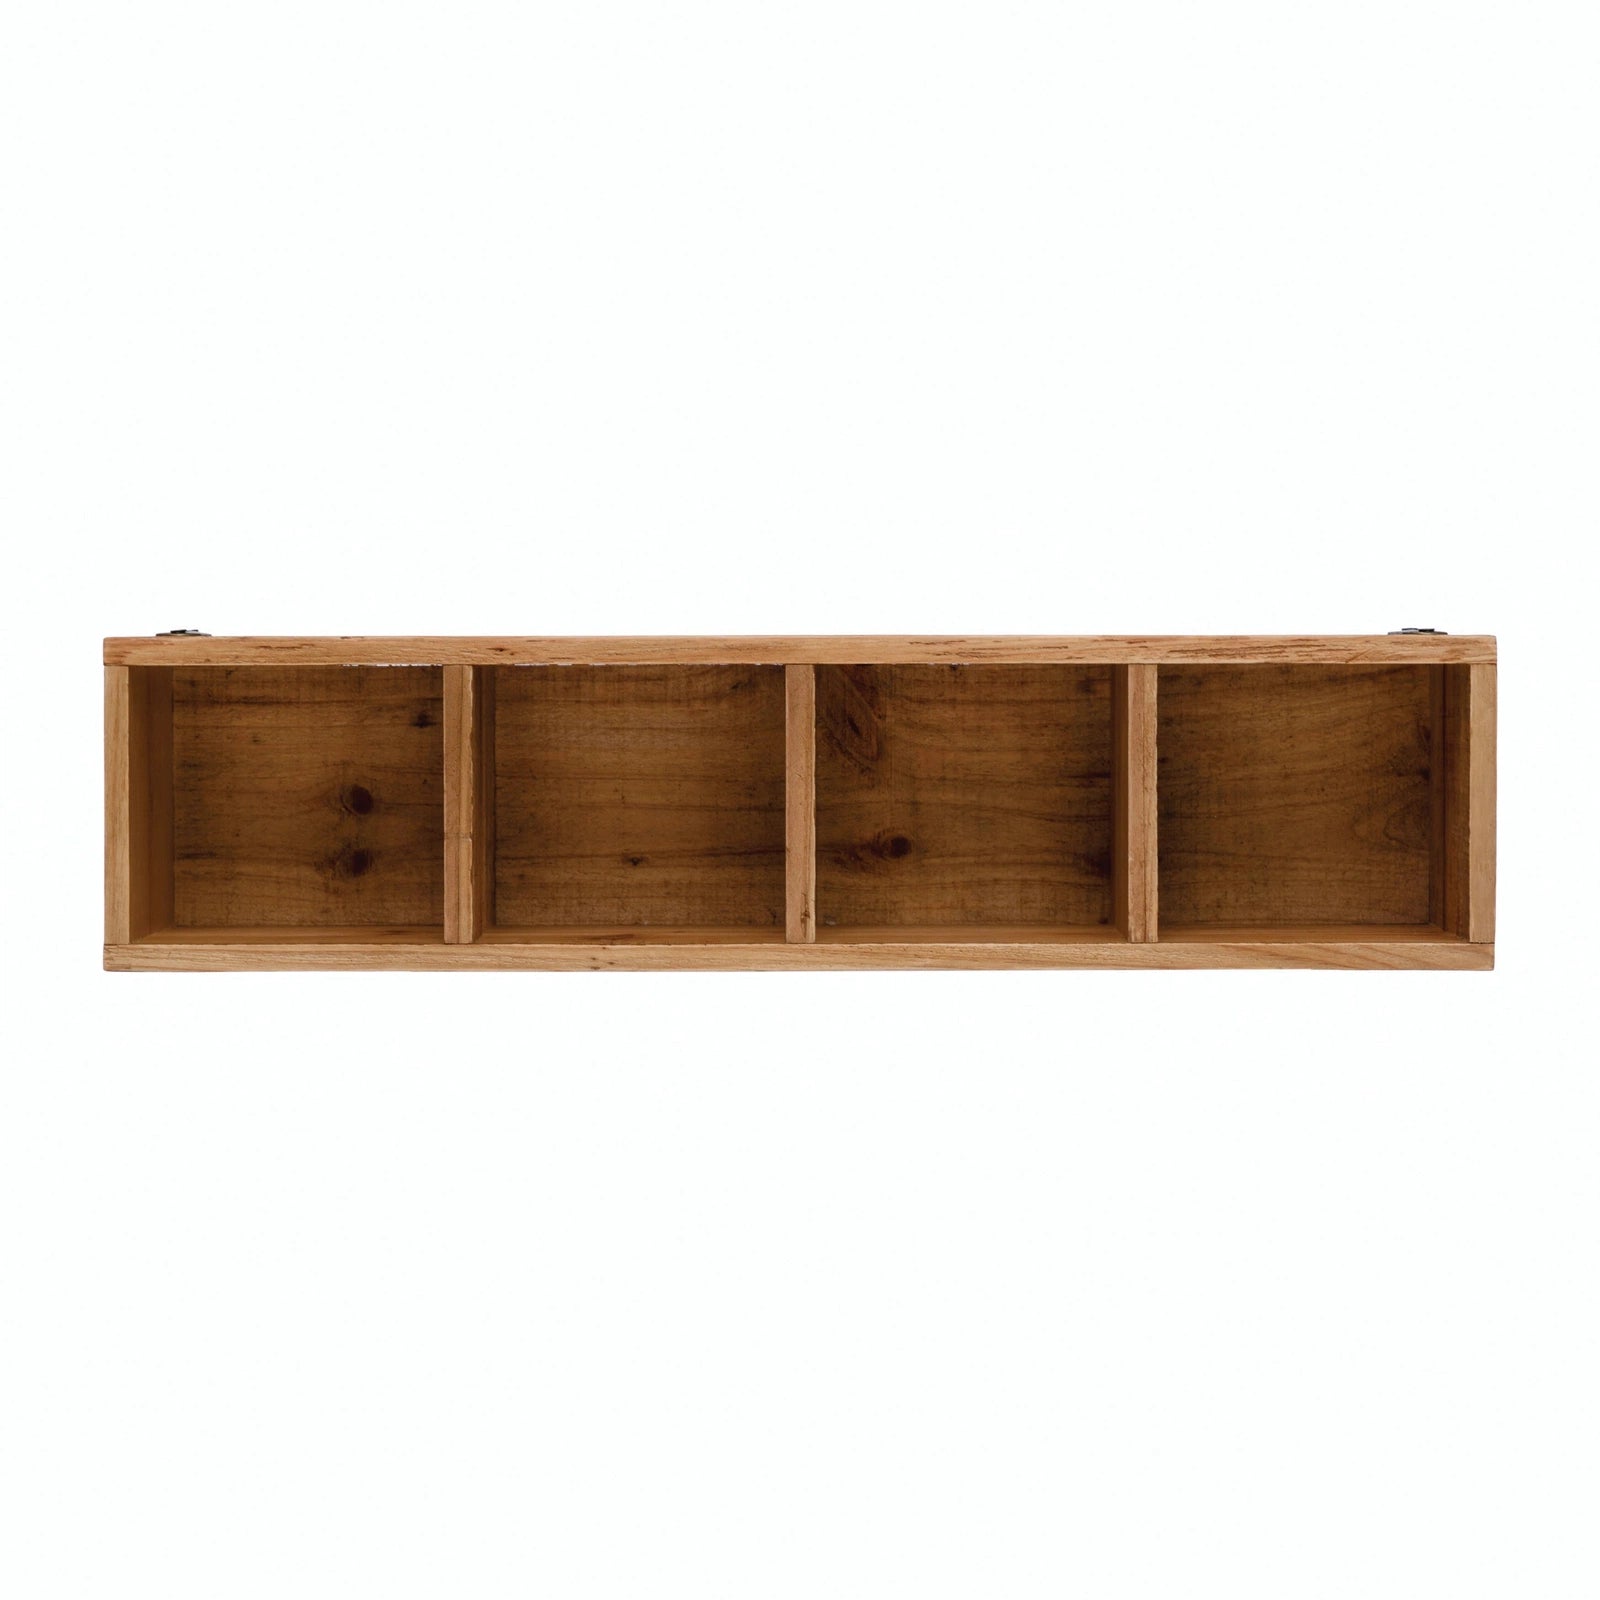 Fir Wood Four Section Wall Container